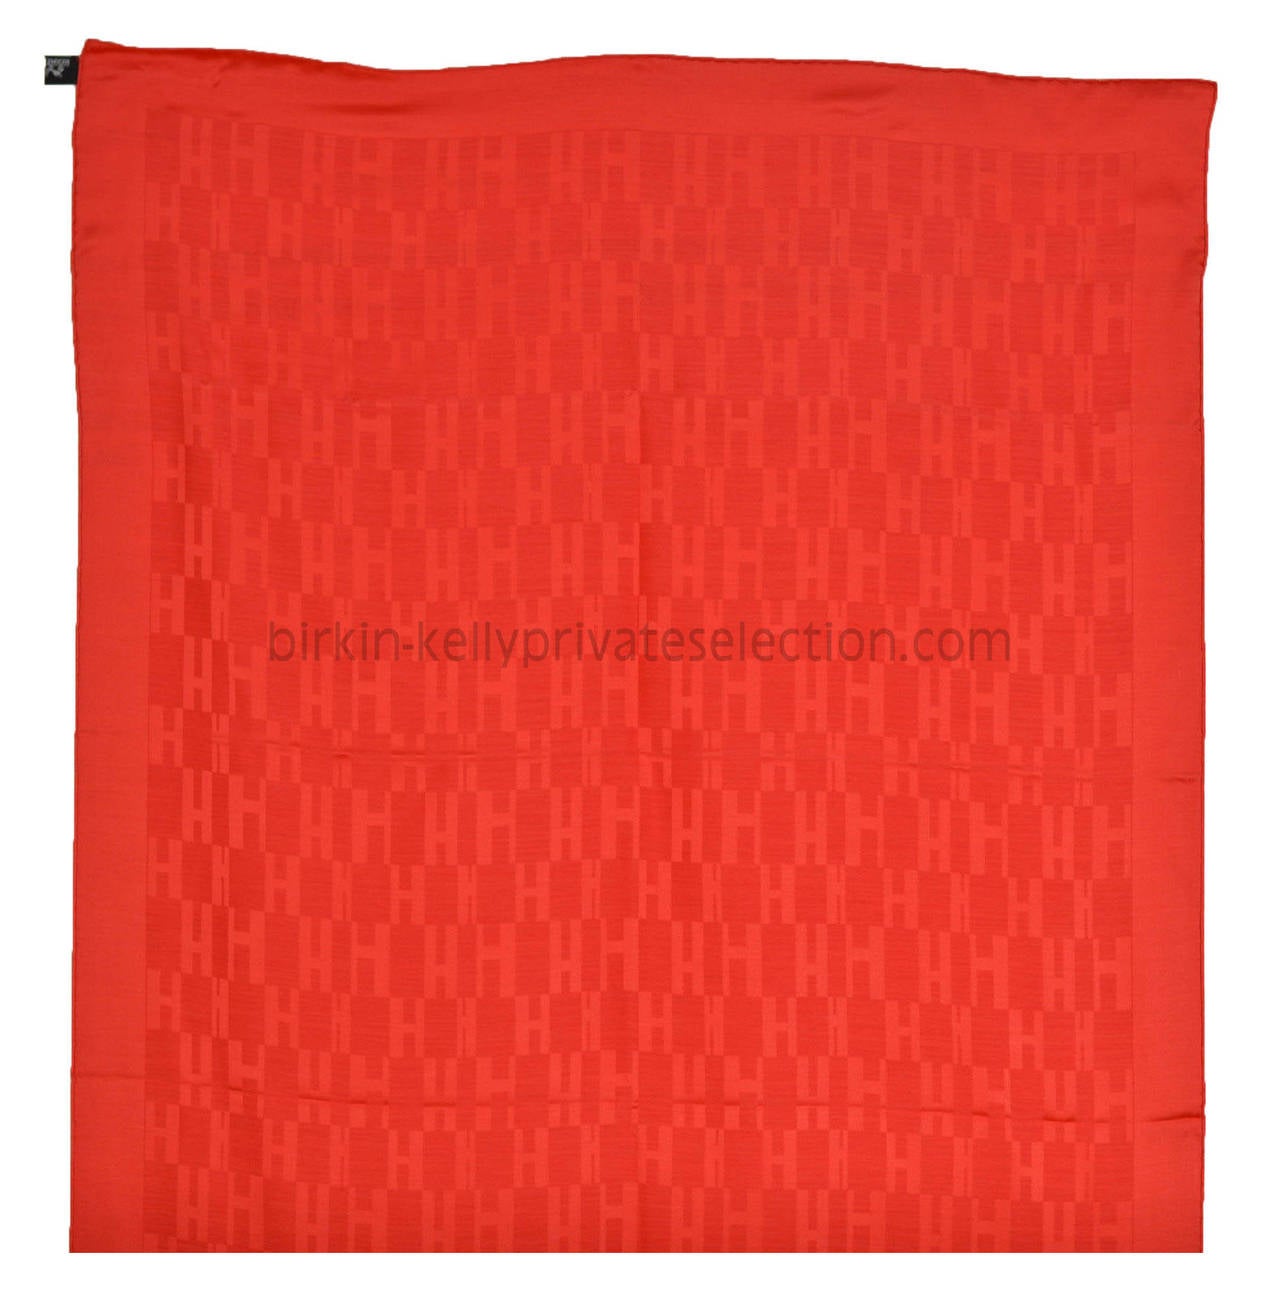 HERMES Scarf H Silk Cotton Bright Red 2015.

Pre-owned and never used.

Bought it in Hermes store in 2015.

Composition; Silk 75% Cotton 25%.

Size; 75cm x 180cm.

Color; Rouge Vif.

Model; H.

-Original Invoice.

-Shipment and